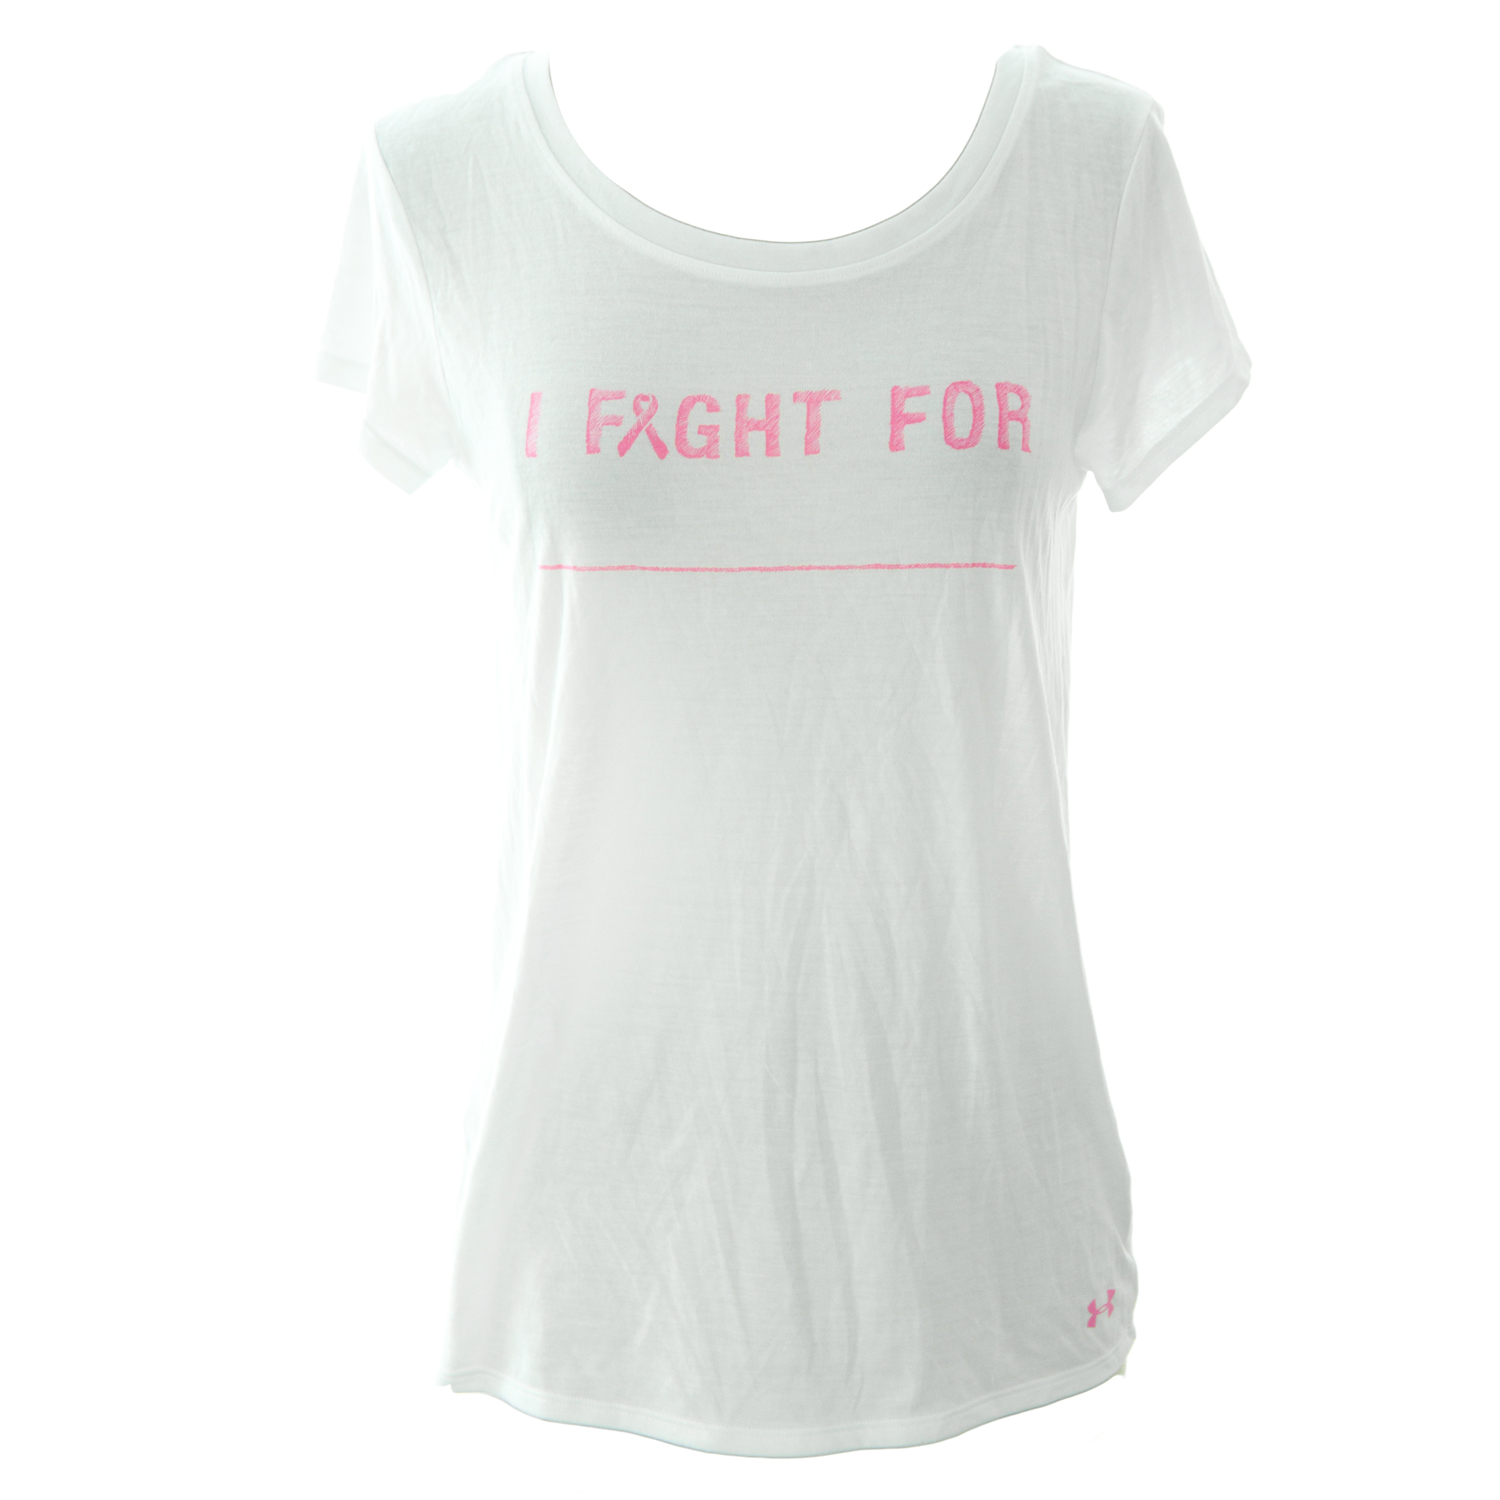 Under Armour Women's Power in Pink "I Fight For" T-Shirt Medium White - image 1 of 2